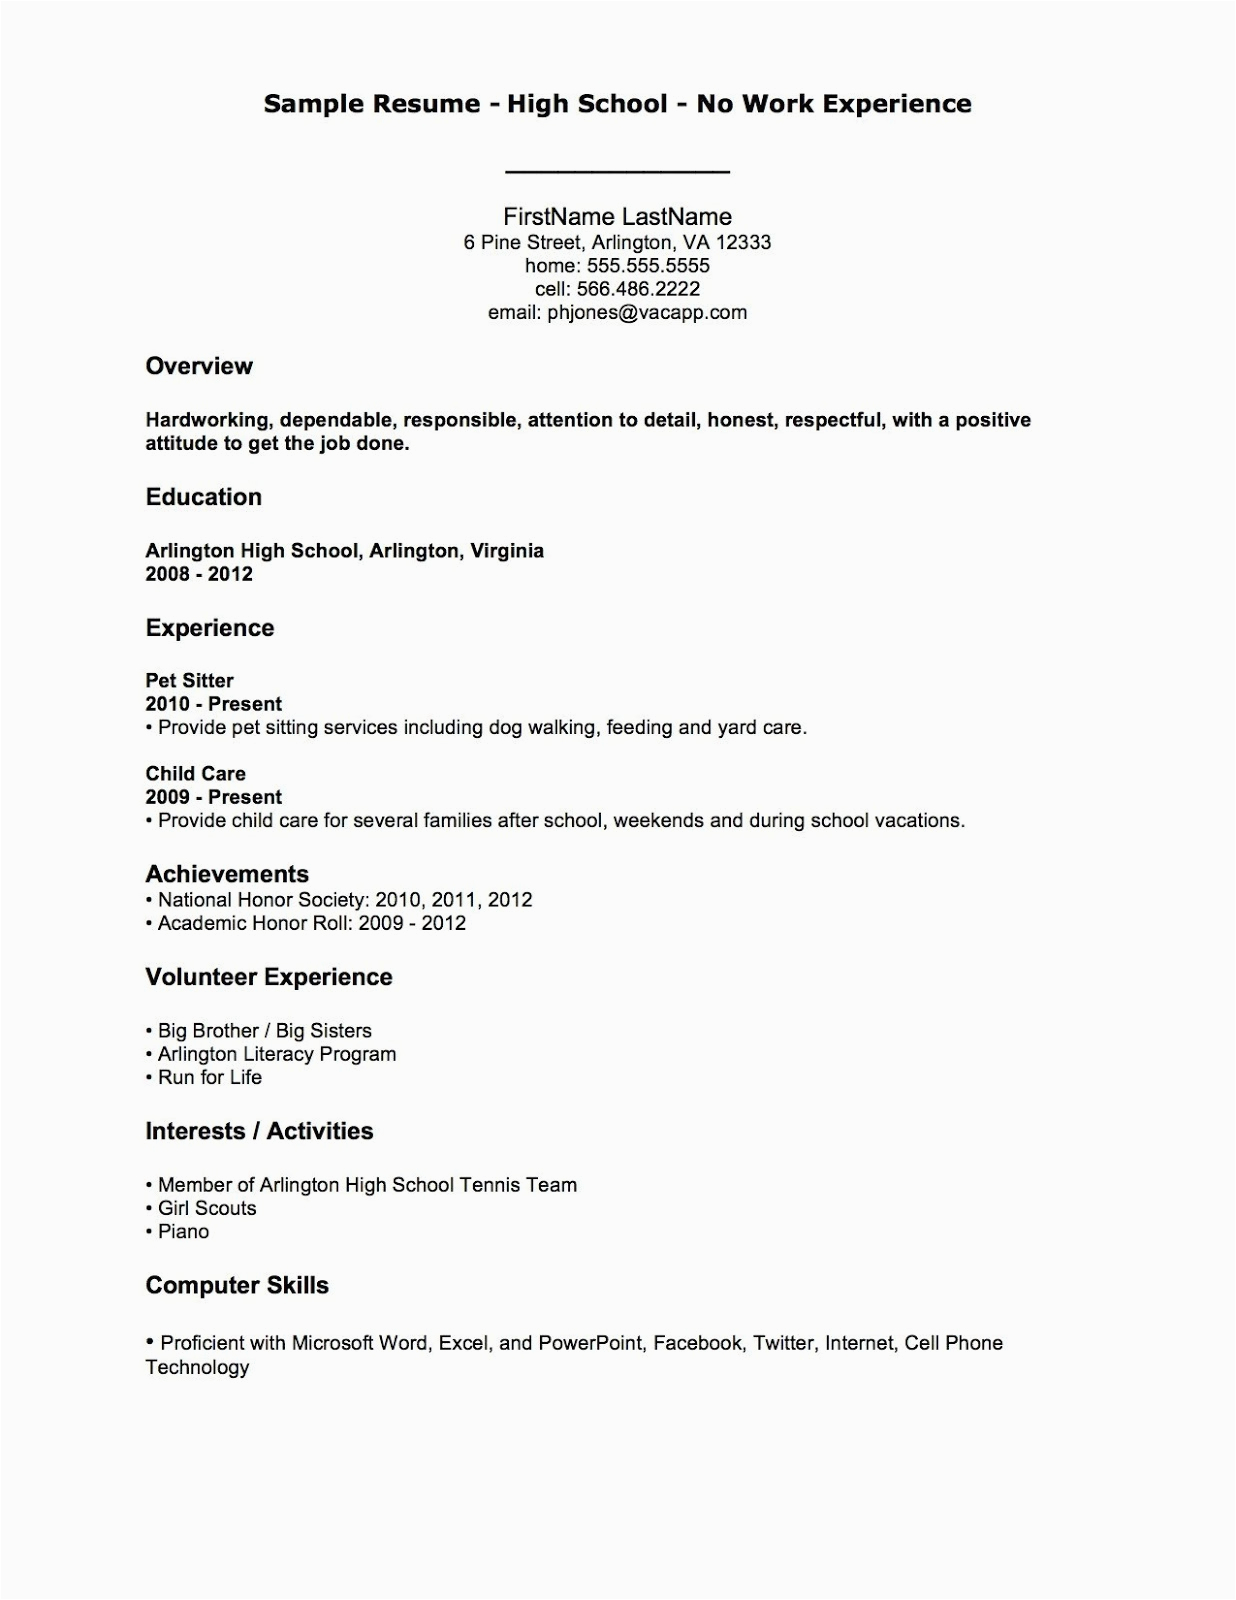 Resume Objective Sample for First Job First Job Sample Resume